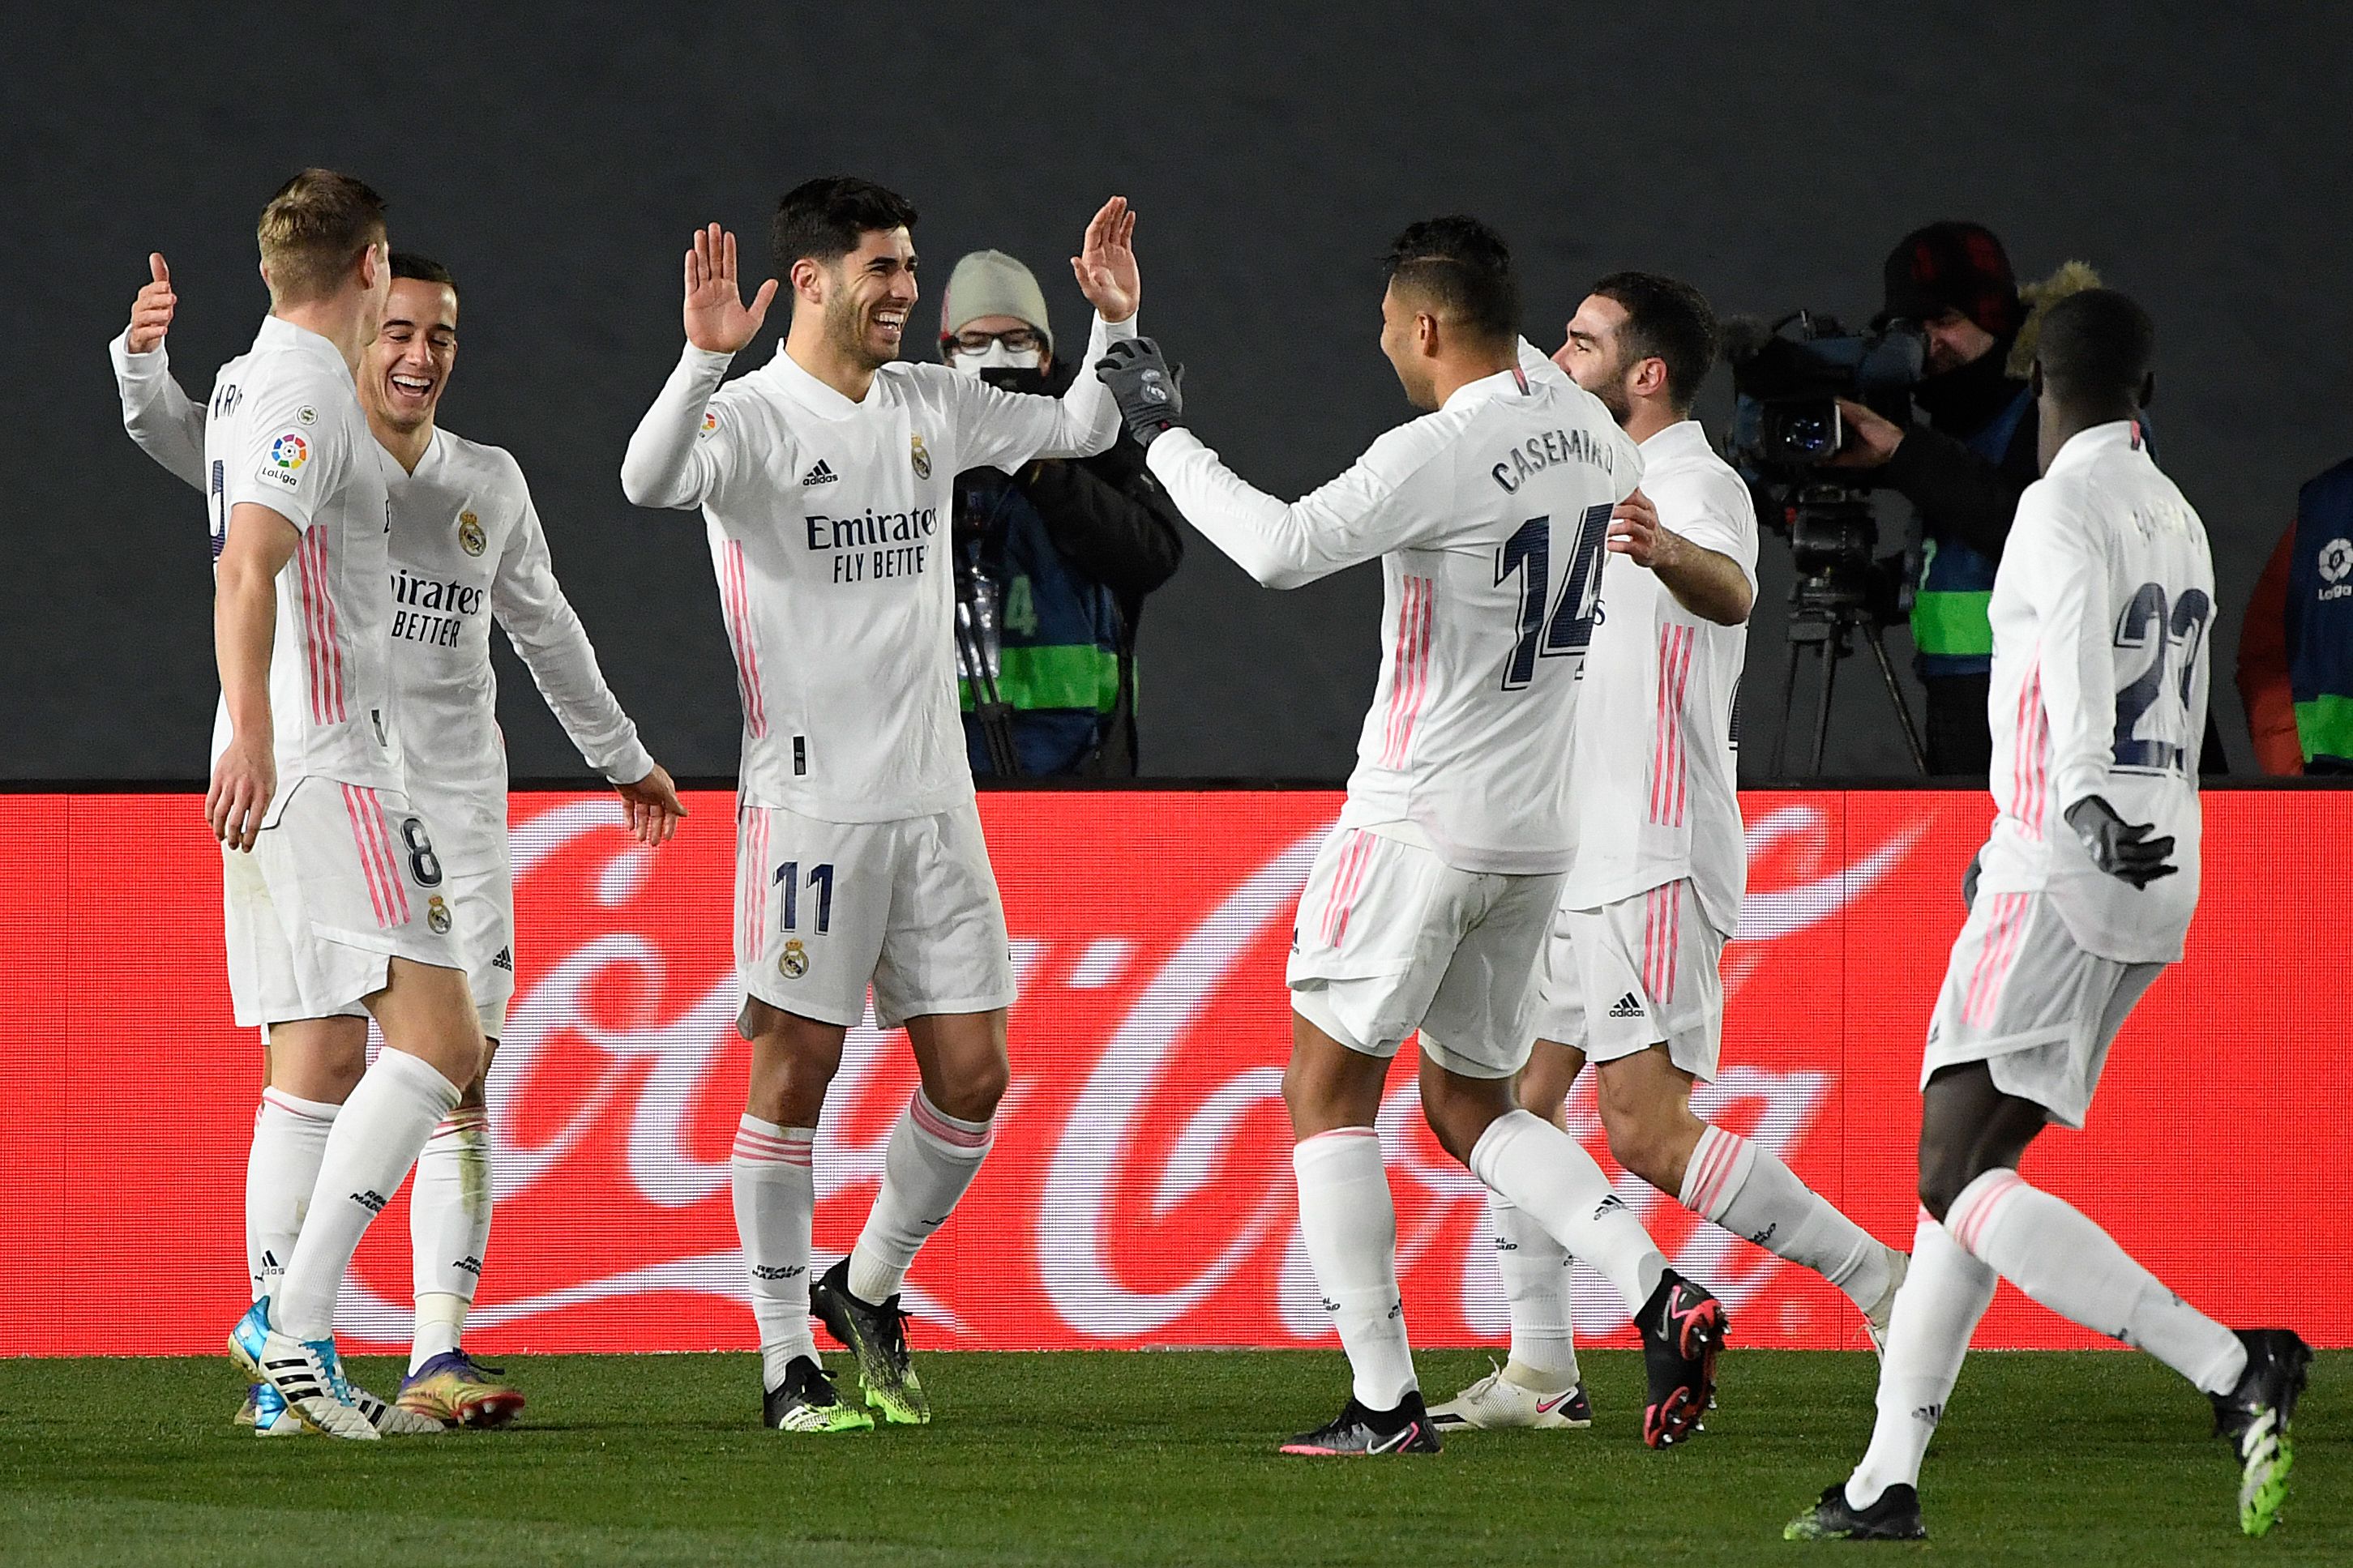 Vasquez To Start - 4-3-3 Predicted Real Madrid Line-Up For Semi-Final Against Athletic Bilbao